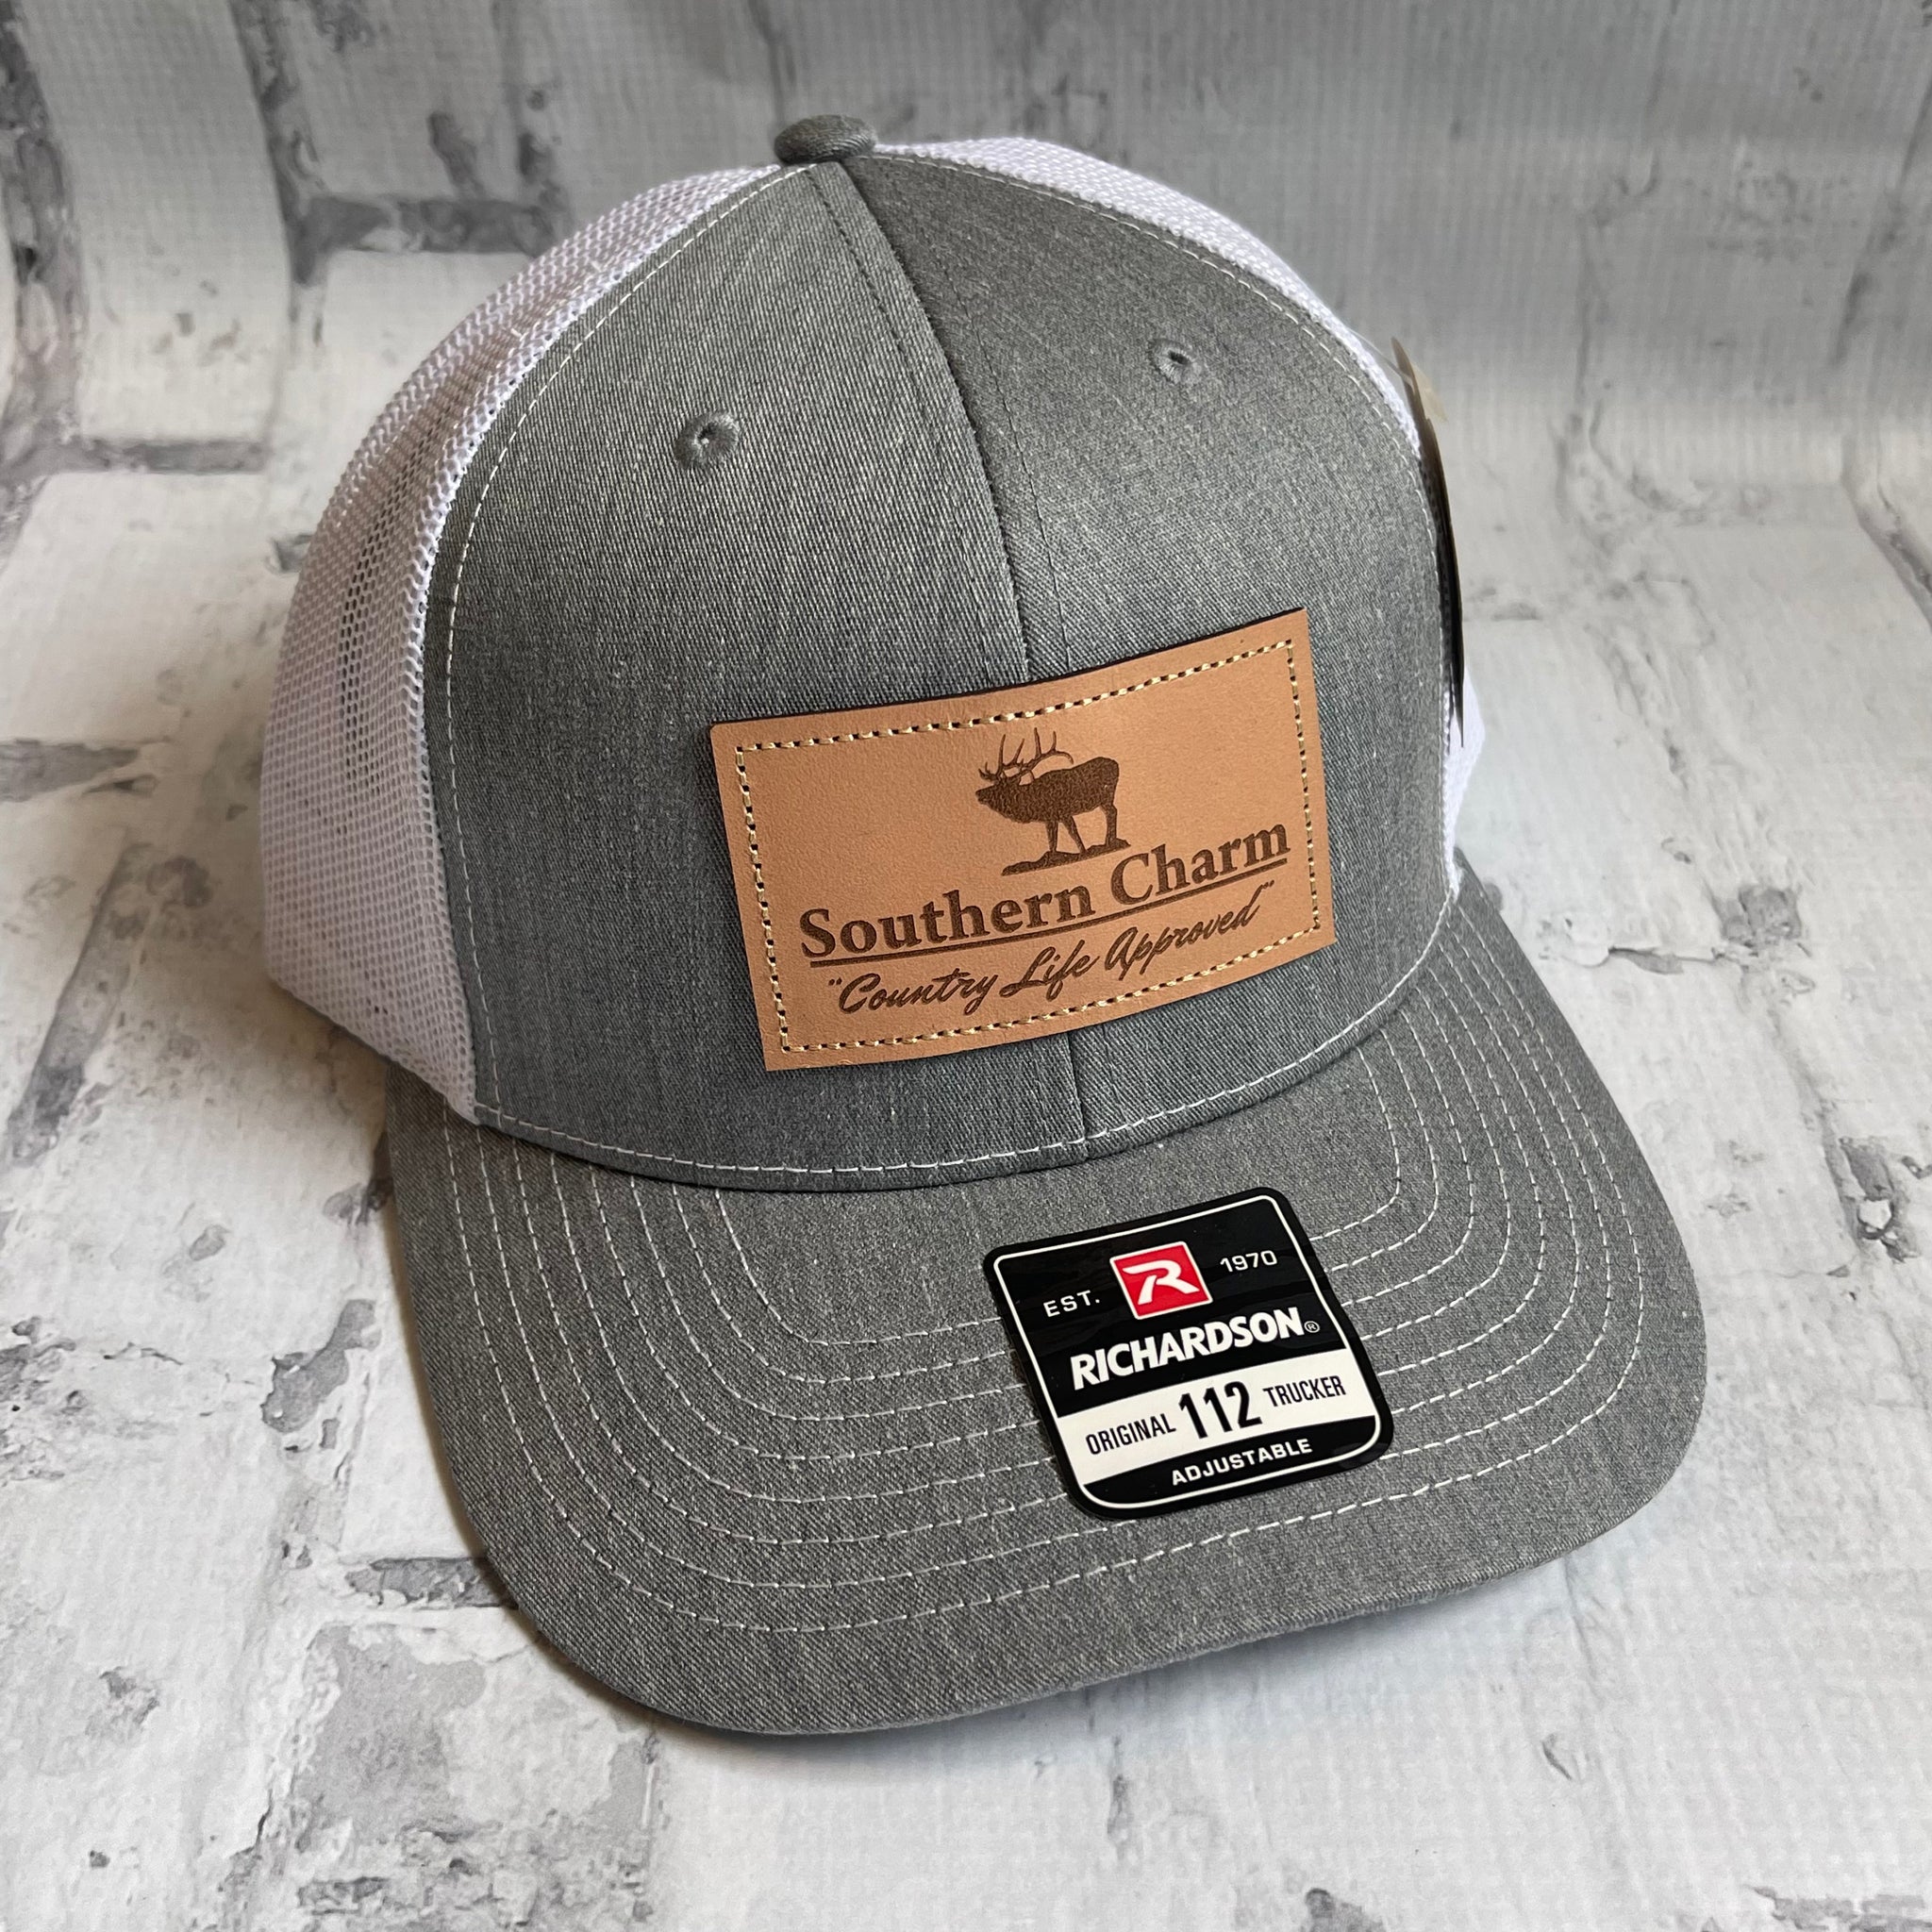 Southern Charm "Elk CLA" Hat - Gray with Leather Patch - Southern Charm "Shop The Charm"